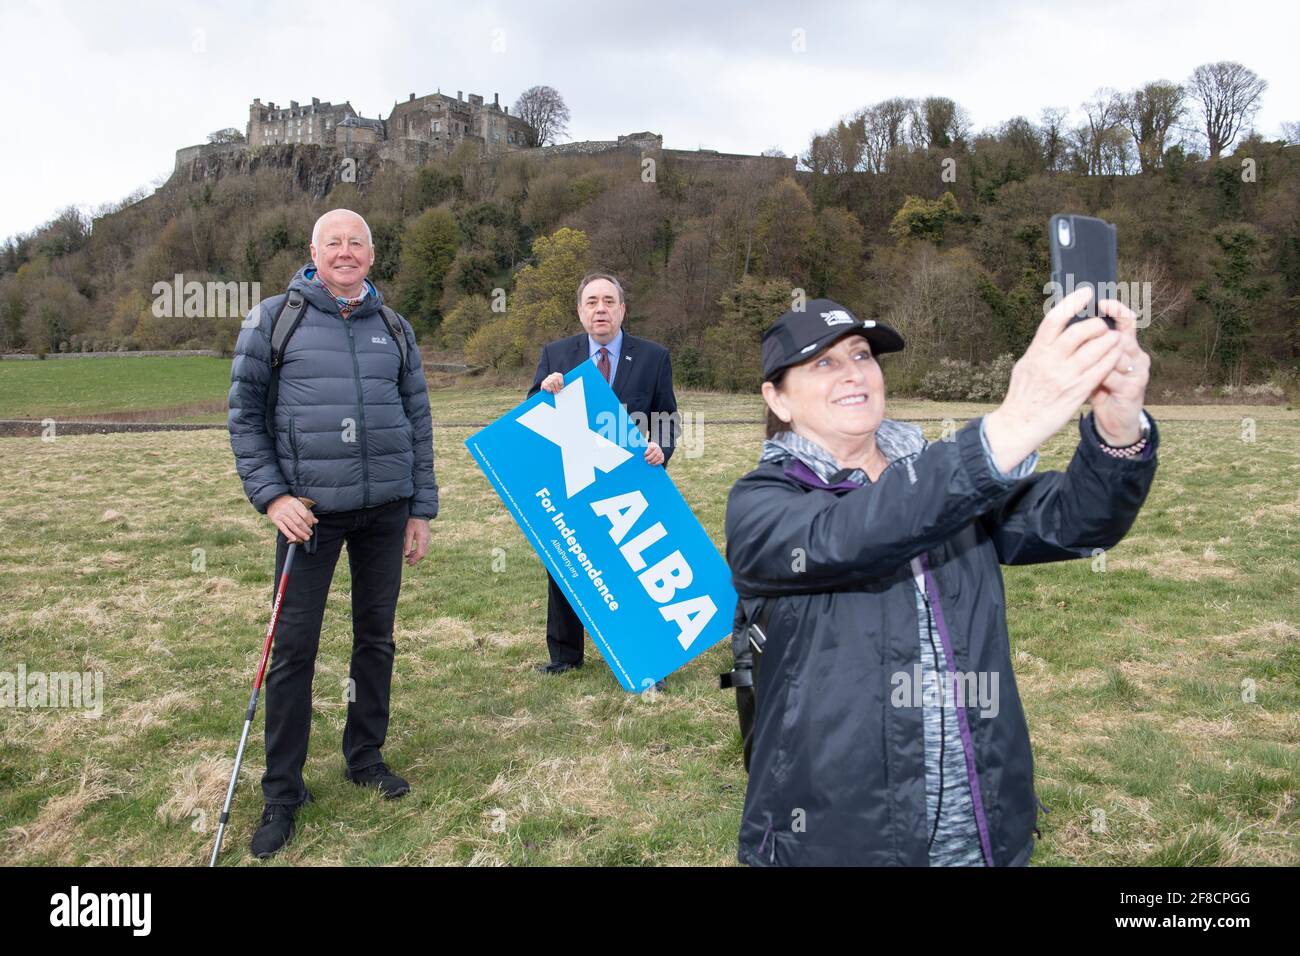 Stirling, Scotland, UK. 13th Apr, 2021. PICTURED: (Middle) Rt Hon Alex Salmond - Alba Part Leader seen posing for a photo with some walkers who were passing by the Castle grounds. Alba Party Leader, Rt Hon Alex Salmond unveils his candidates for Mid Scotland and Fife region. Pic Credit: Colin Fisher/Alamy Live News Stock Photo